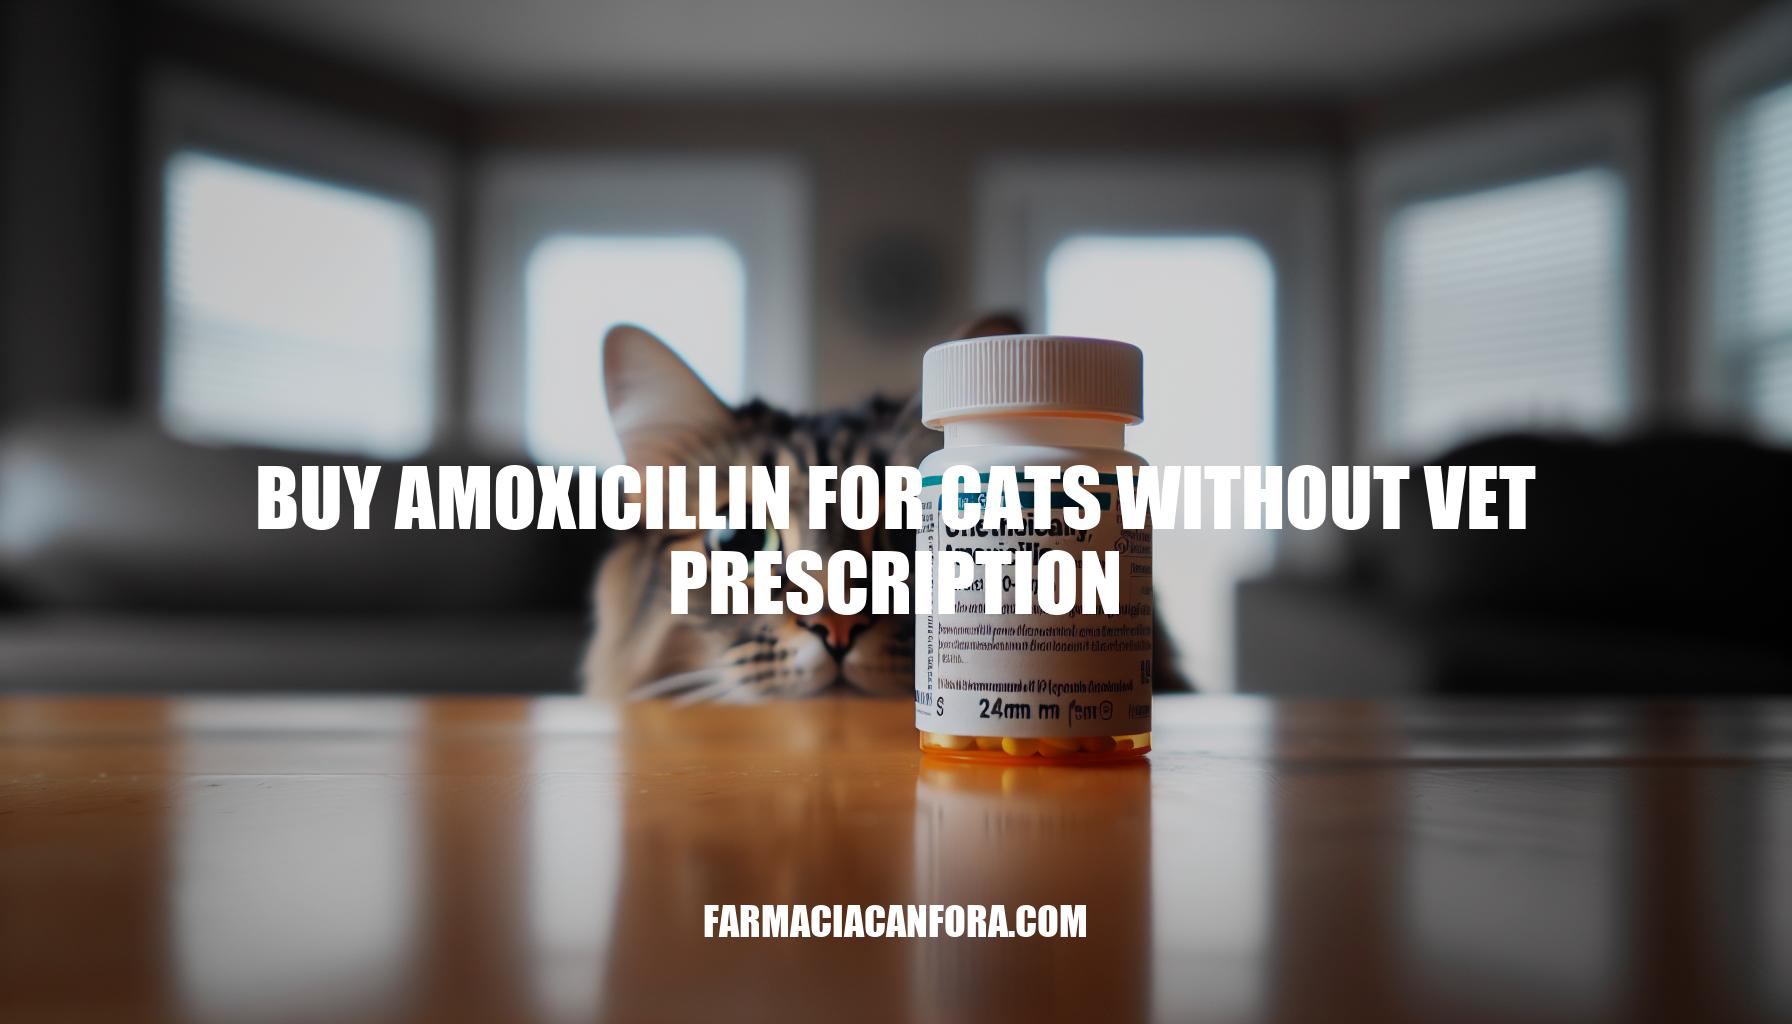 Dangers of Buying Amoxicillin for Cats Without Vet Prescription